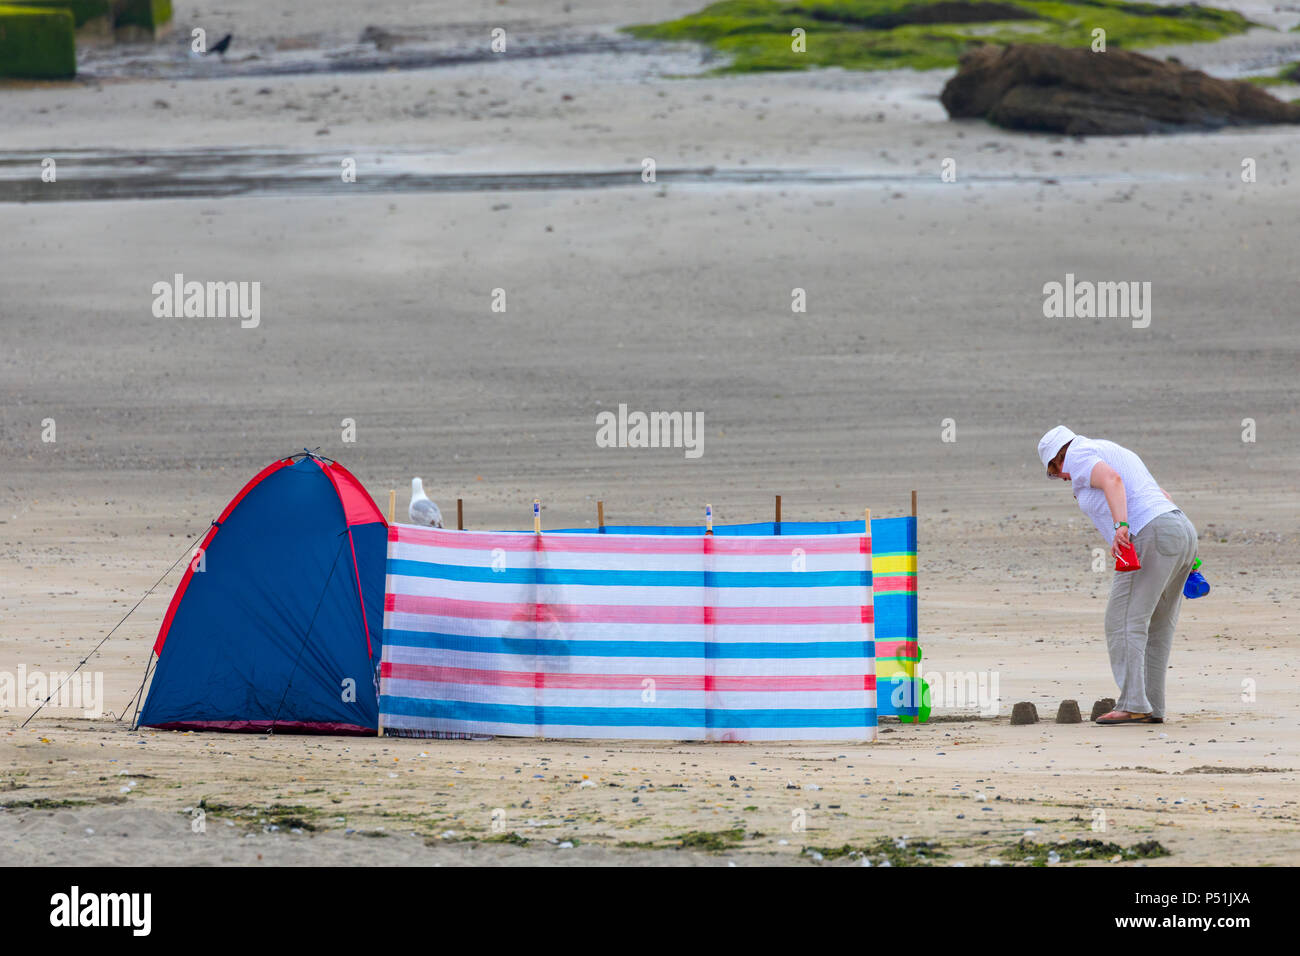 An elderly woman wearing a sunhat making sand castles in the sand alone at looe beach in Cornwall with a tent and wind breaker Stock Photo